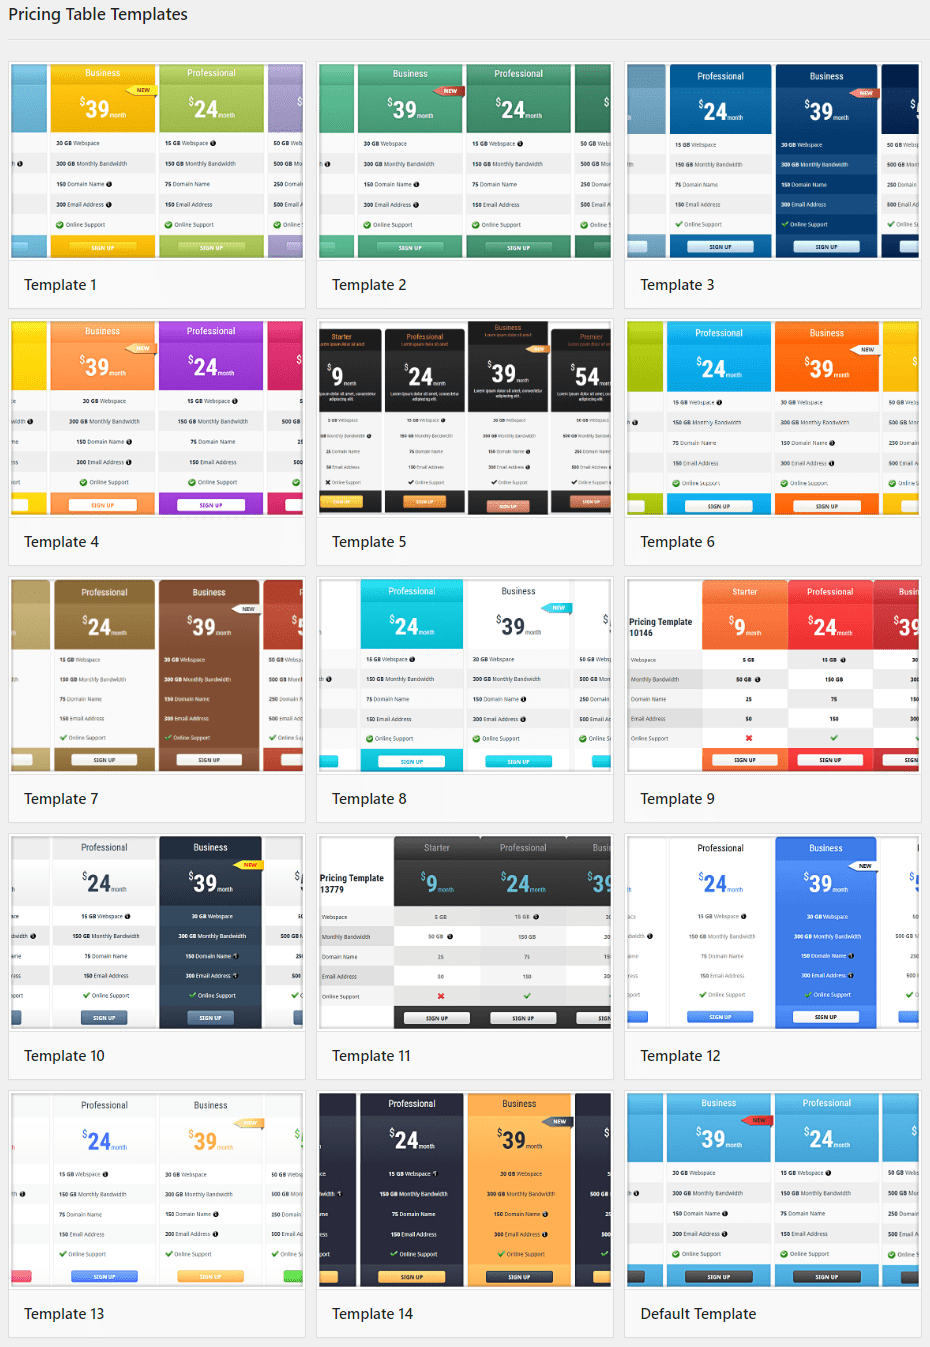 Pricing Table 15 ready-made templates.